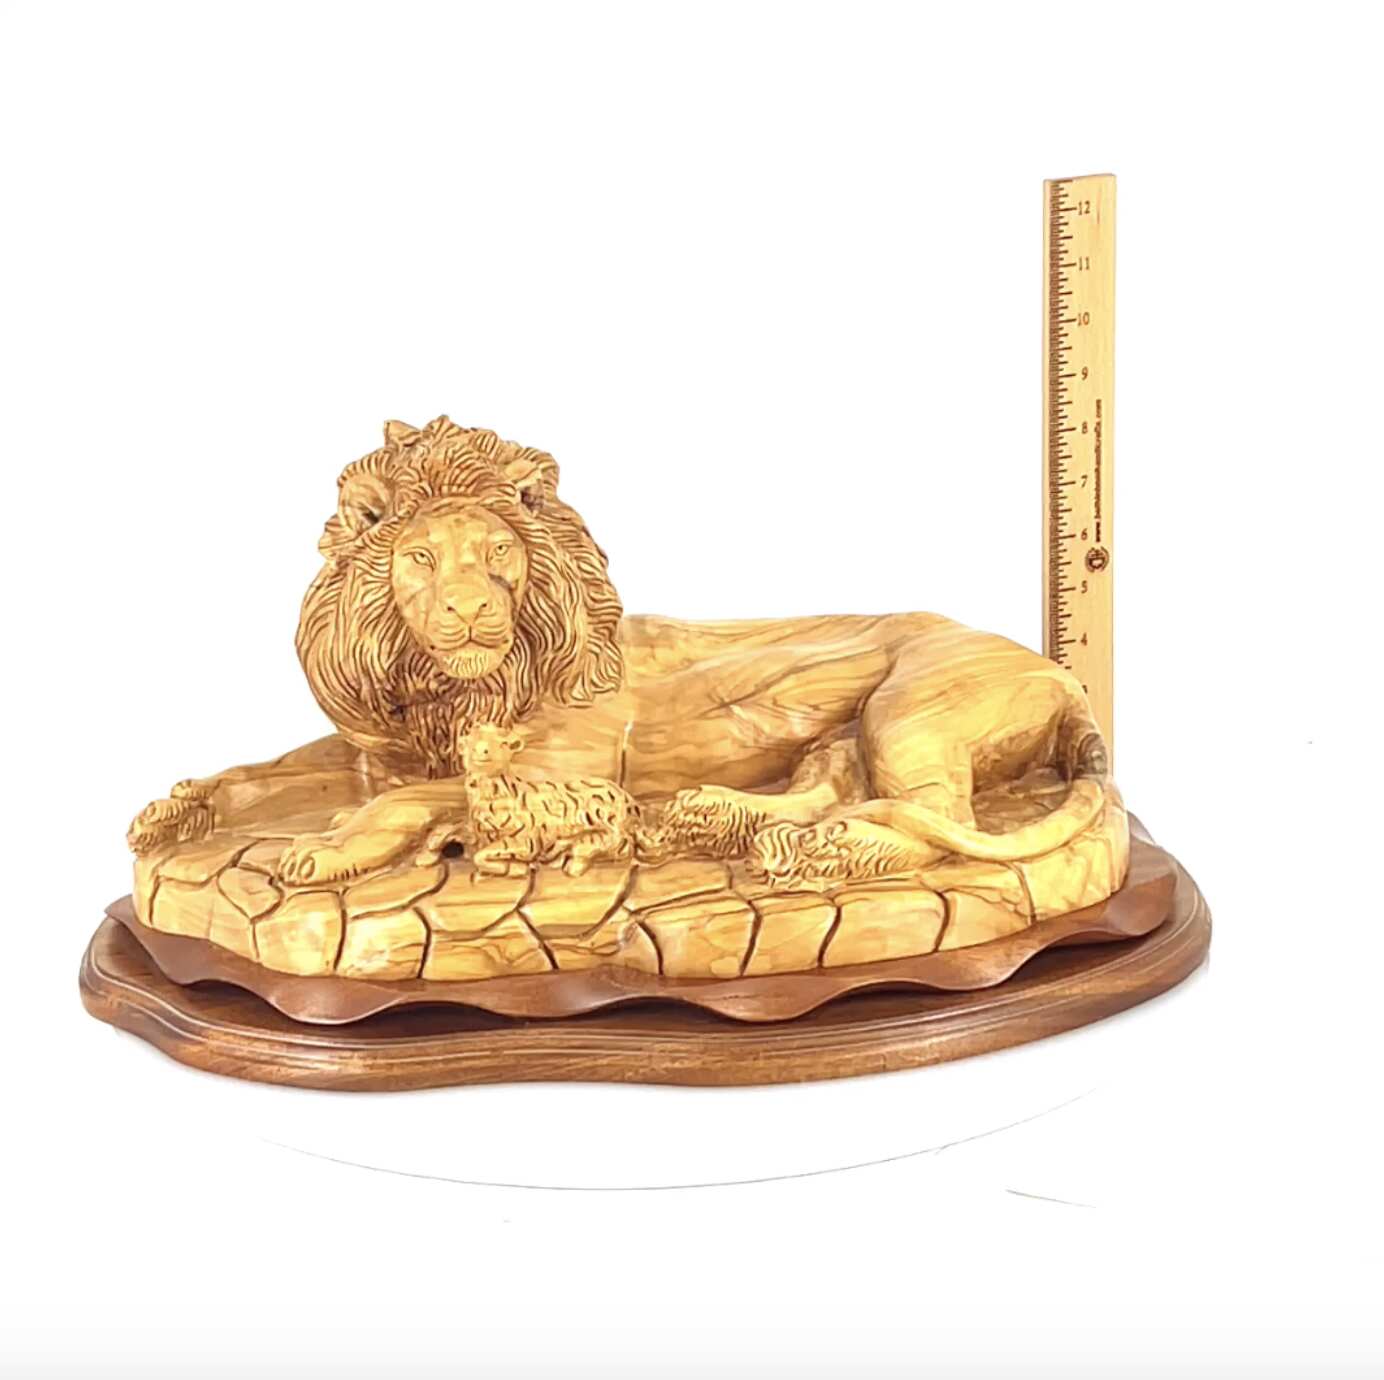 Lion with Lamb, Masterpiece Wooden Sculpture 19.7